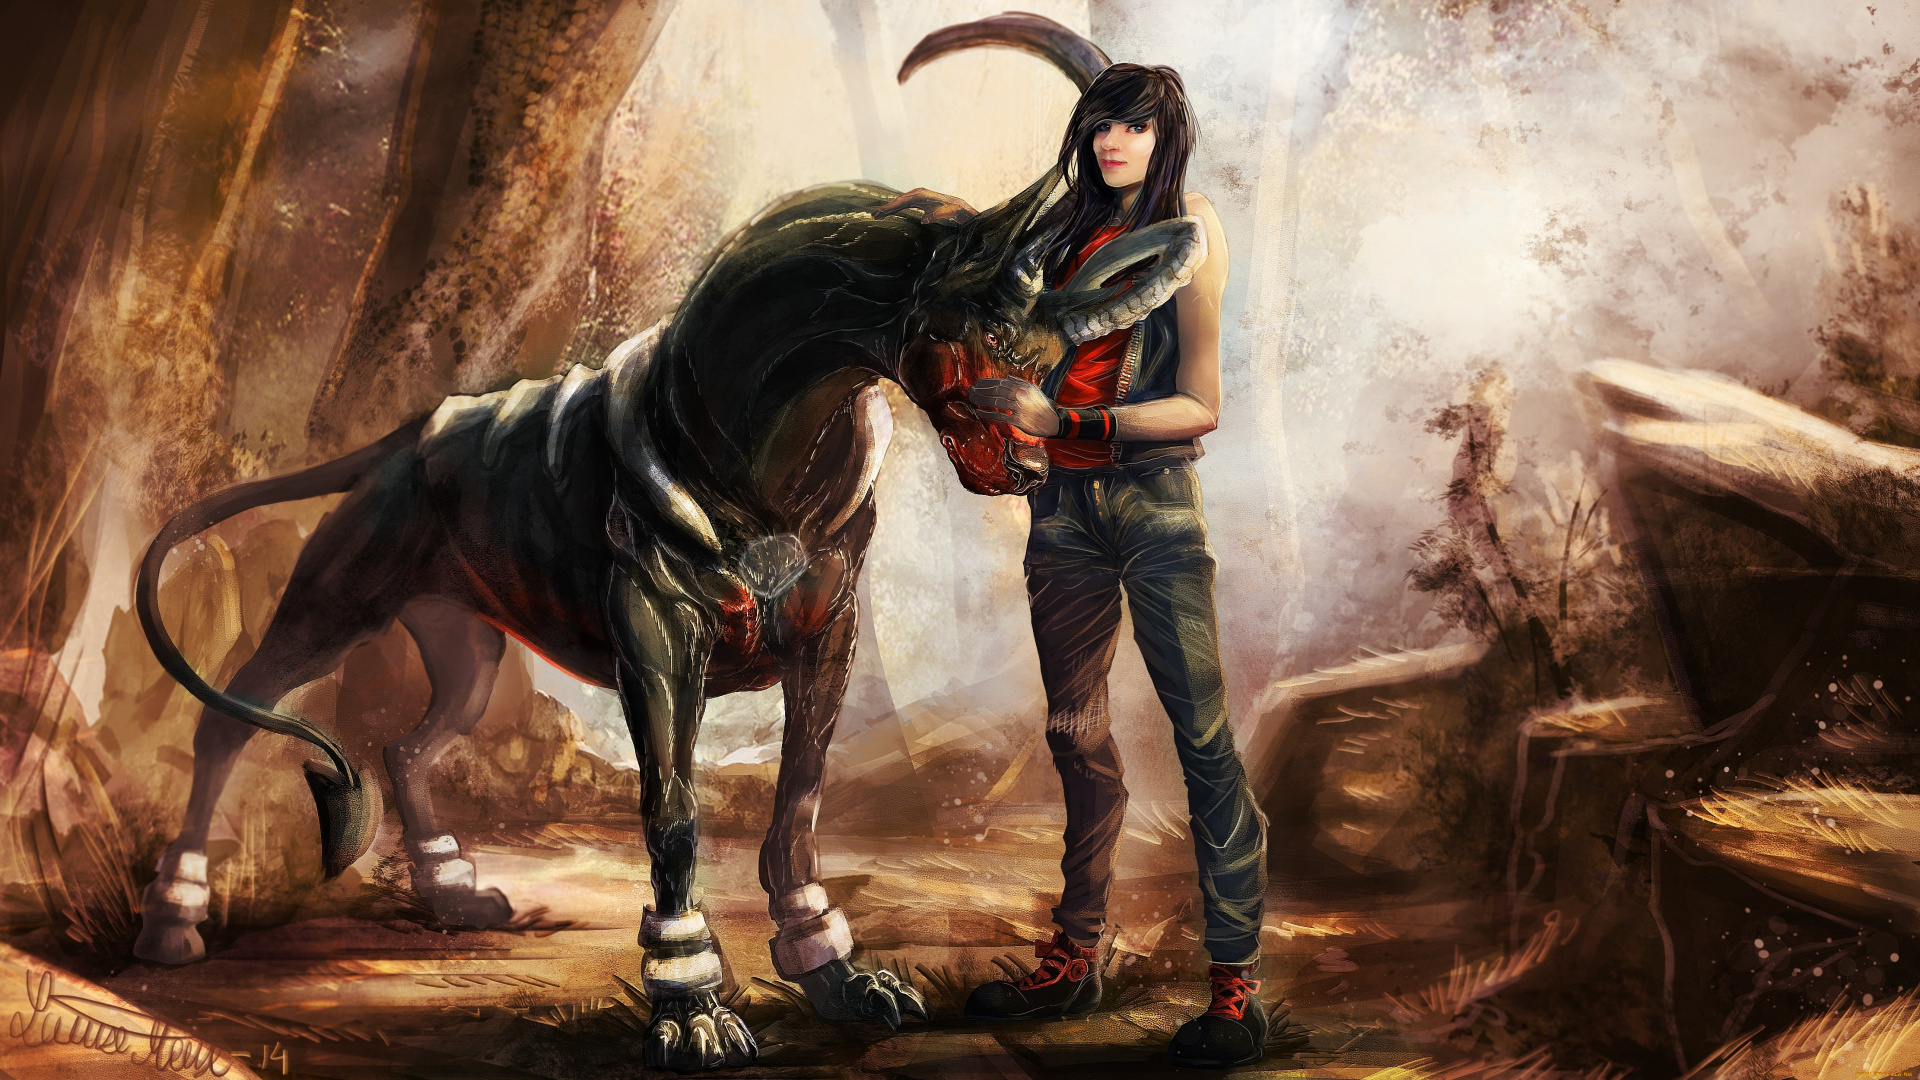 Woman in Black and Red Long Sleeve Shirt and Blue Denim Jeans Standing Beside Black Horse. Wallpaper in 1920x1080 Resolution